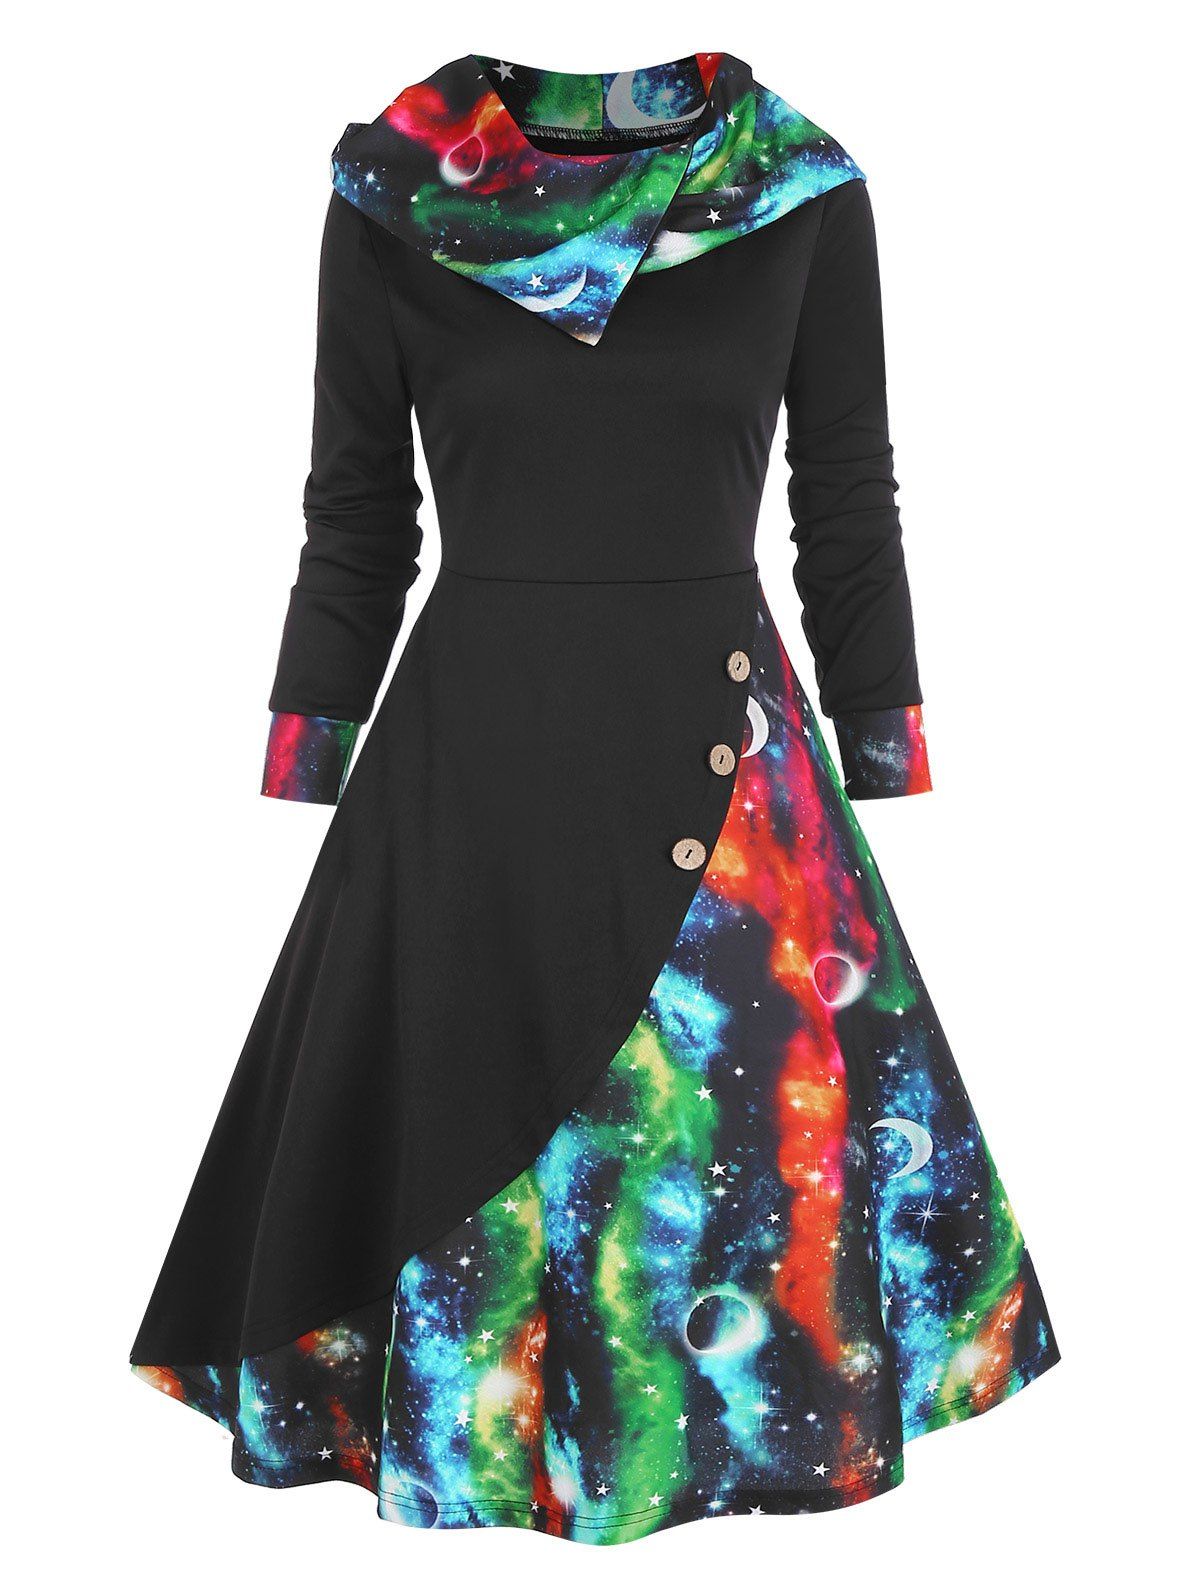 Gothic Contrast Galaxy Print Hooded Mock Button A Line Dress - multicolor M